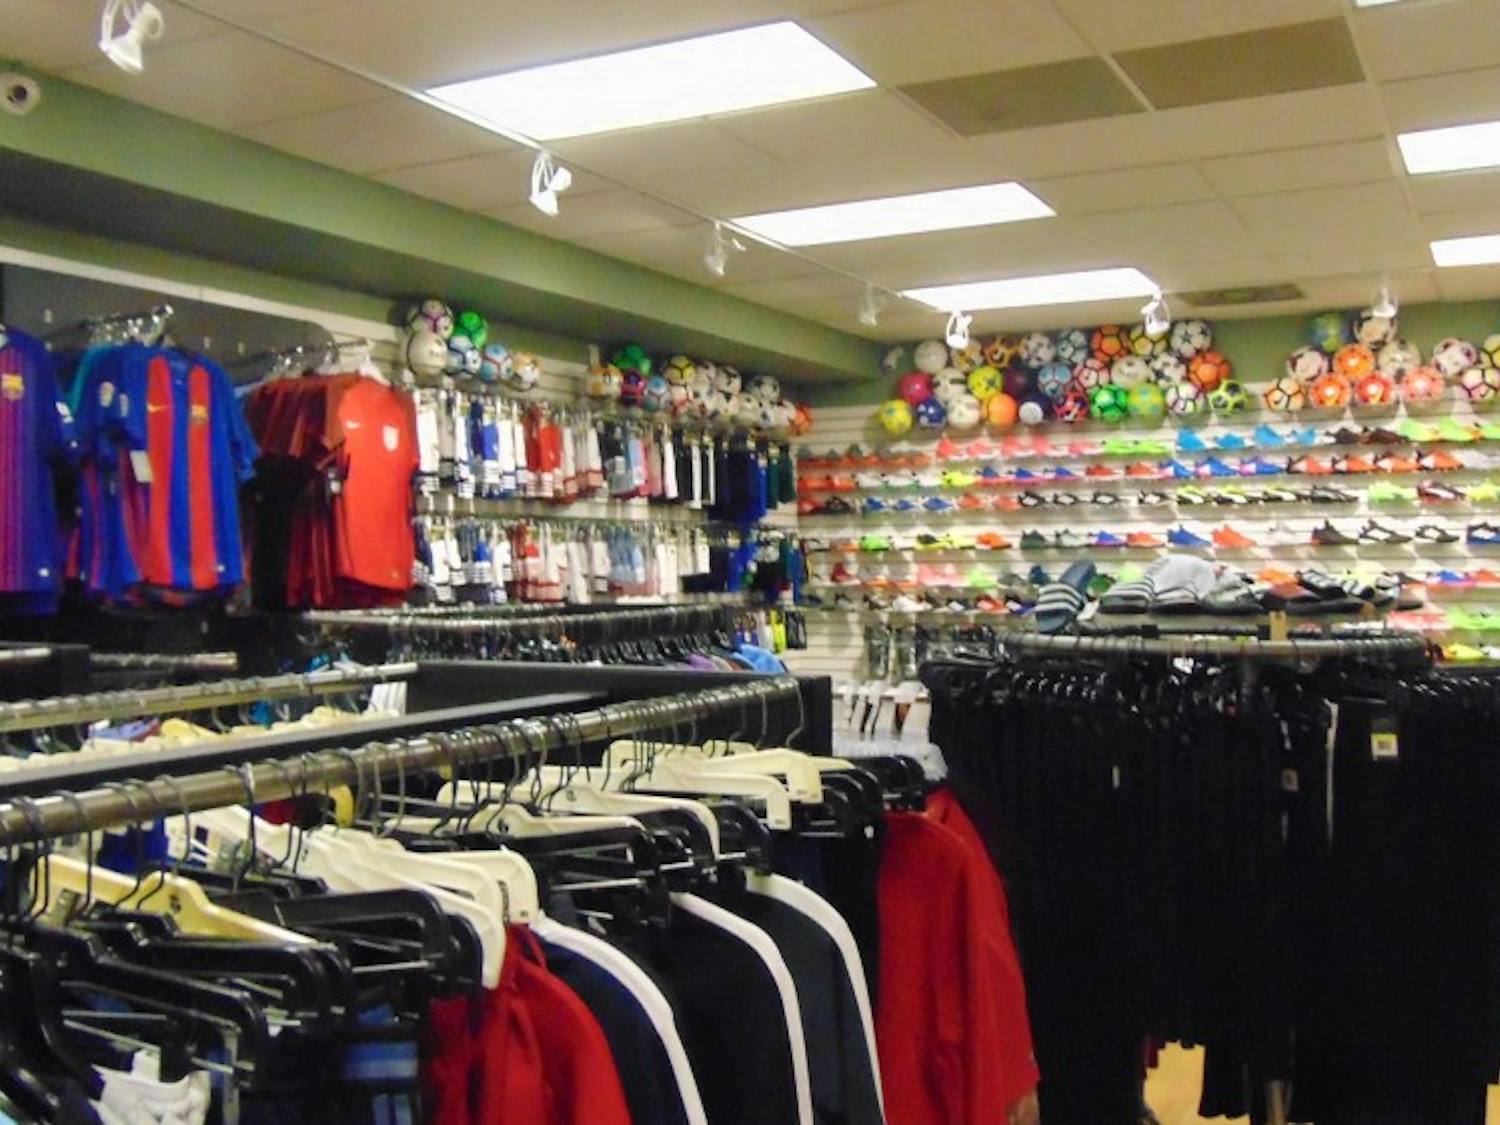 DC Soccer Supplies sells various soccer equipment, training gear and uniforms in Tenleytown.